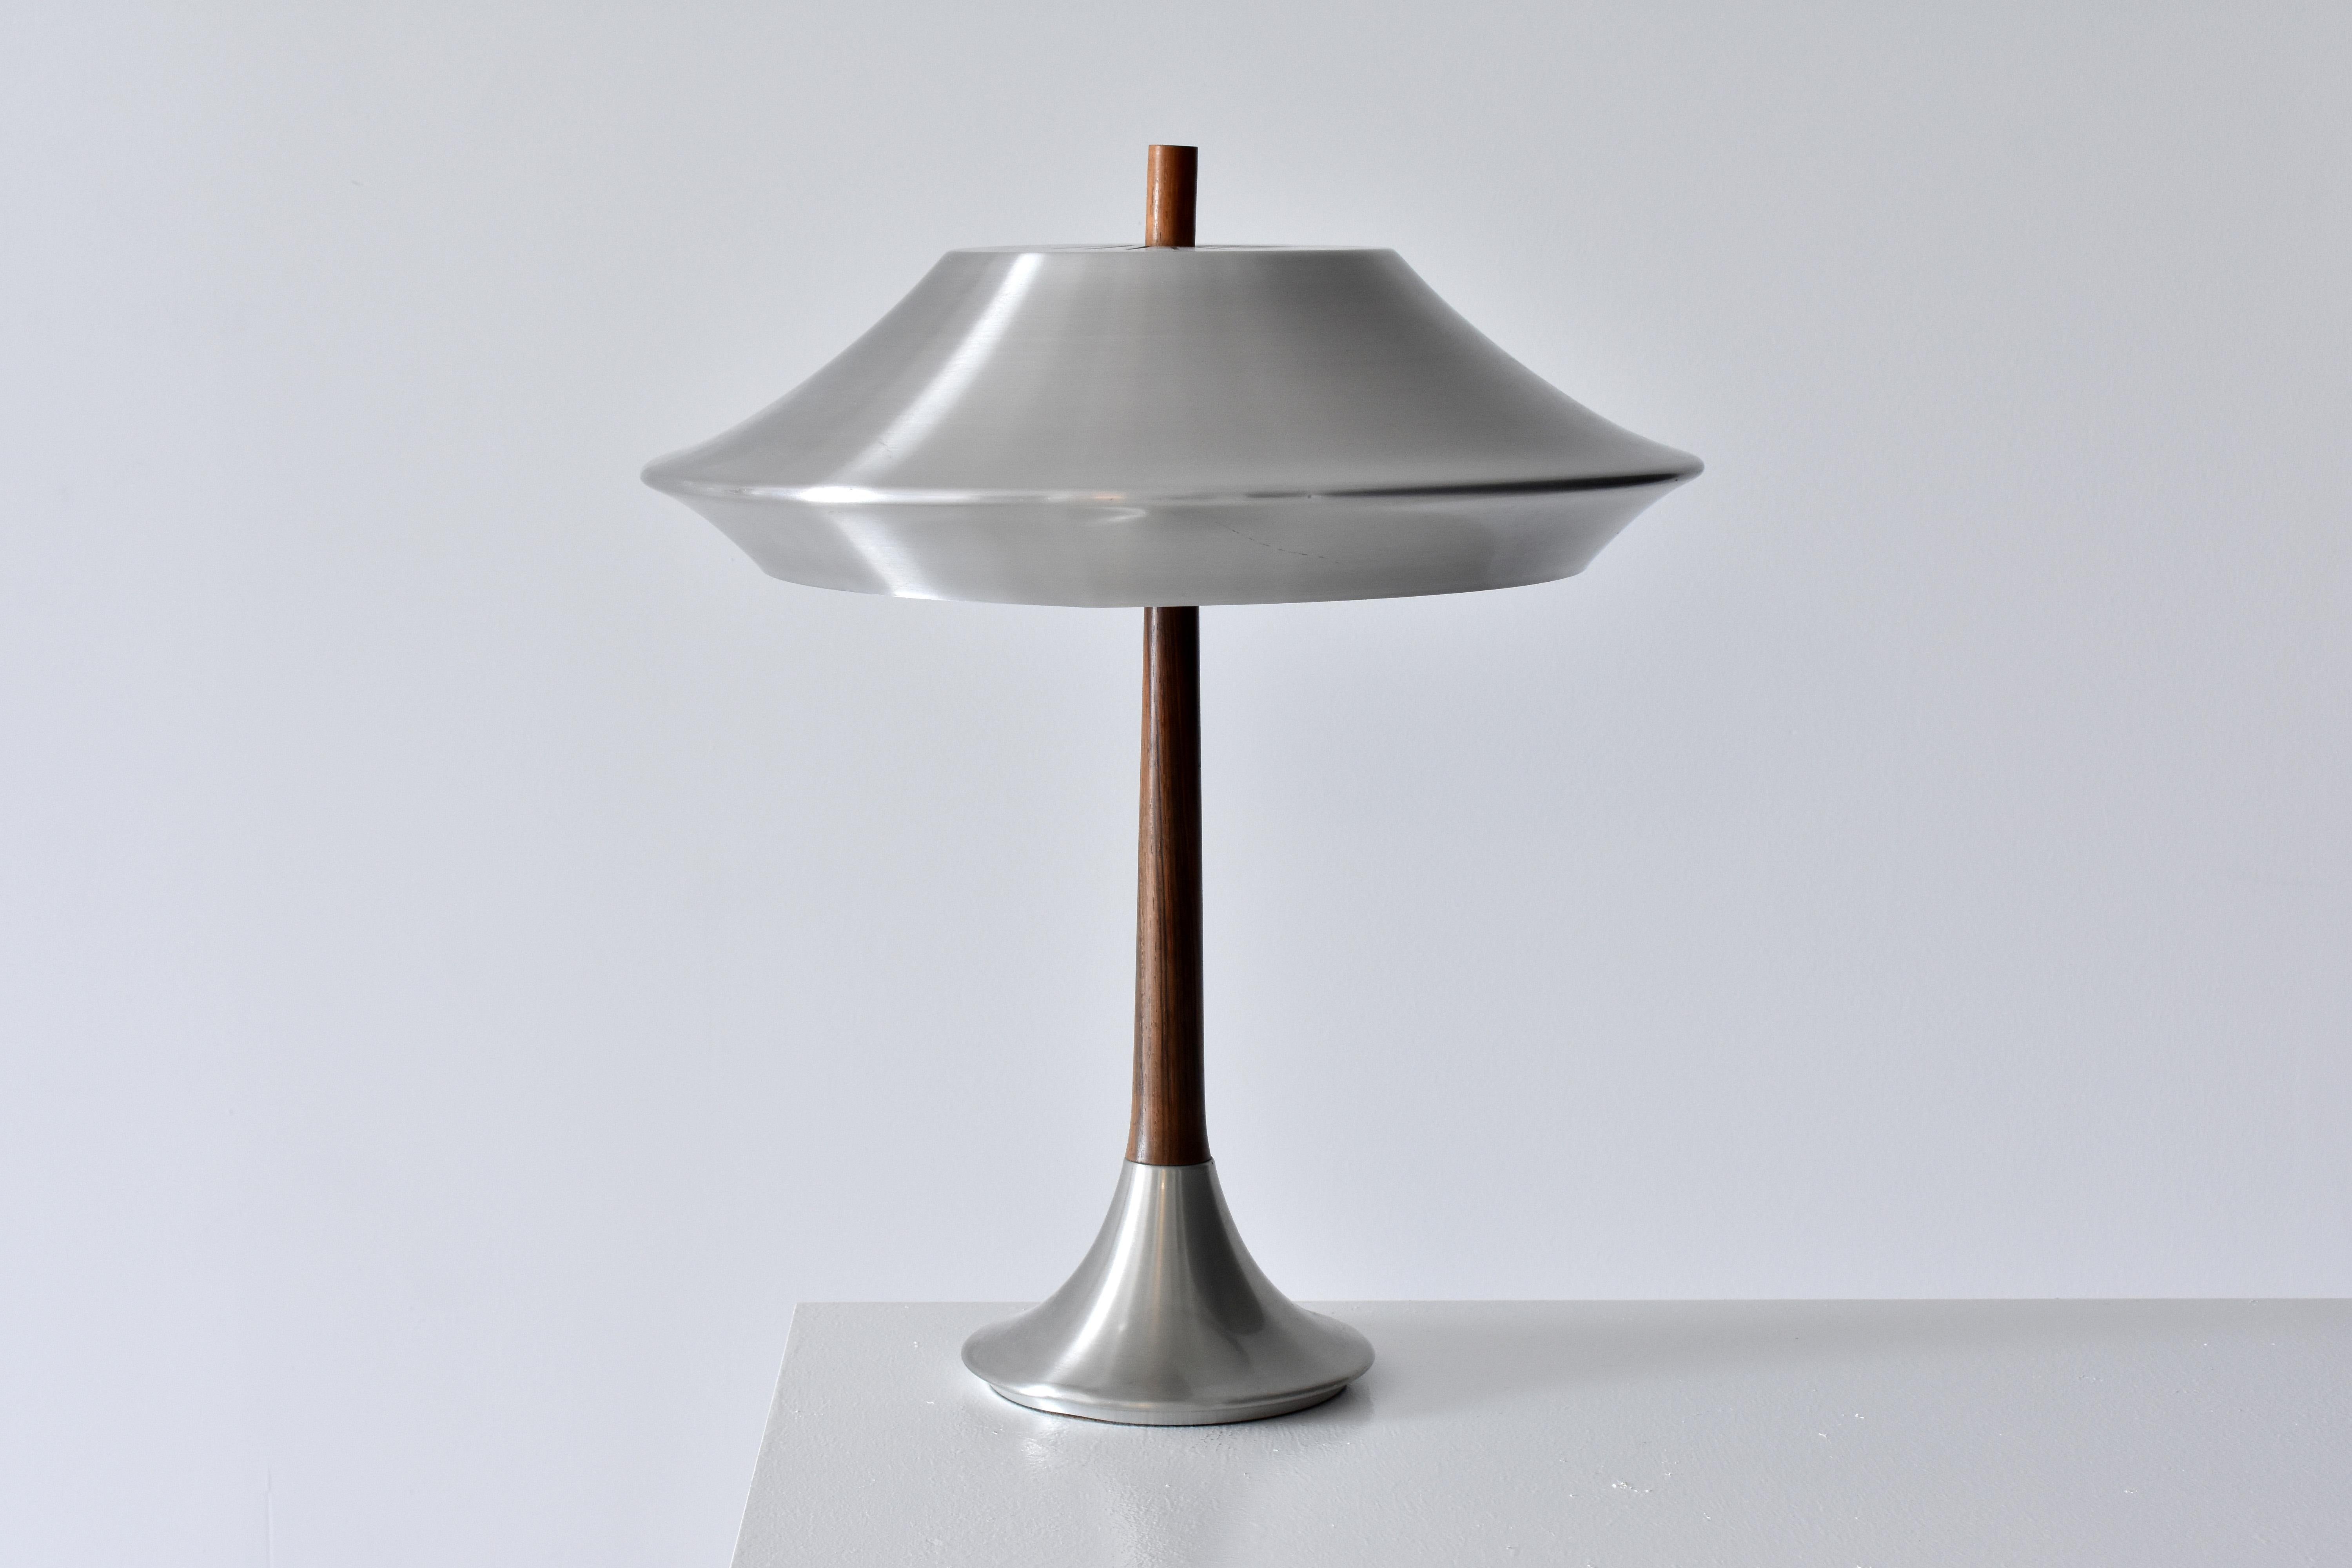 A table lamp designed by Jo Hammerborg. Produced by Fog & Mørup in the 1960's. Executed in Aluminium and Rosewood. 

Jo Hammerborg, trained at the Royal Danish Academy of Fine Arts, served as design head at Fog & Mørup. Prior, Hammerborg worked as a